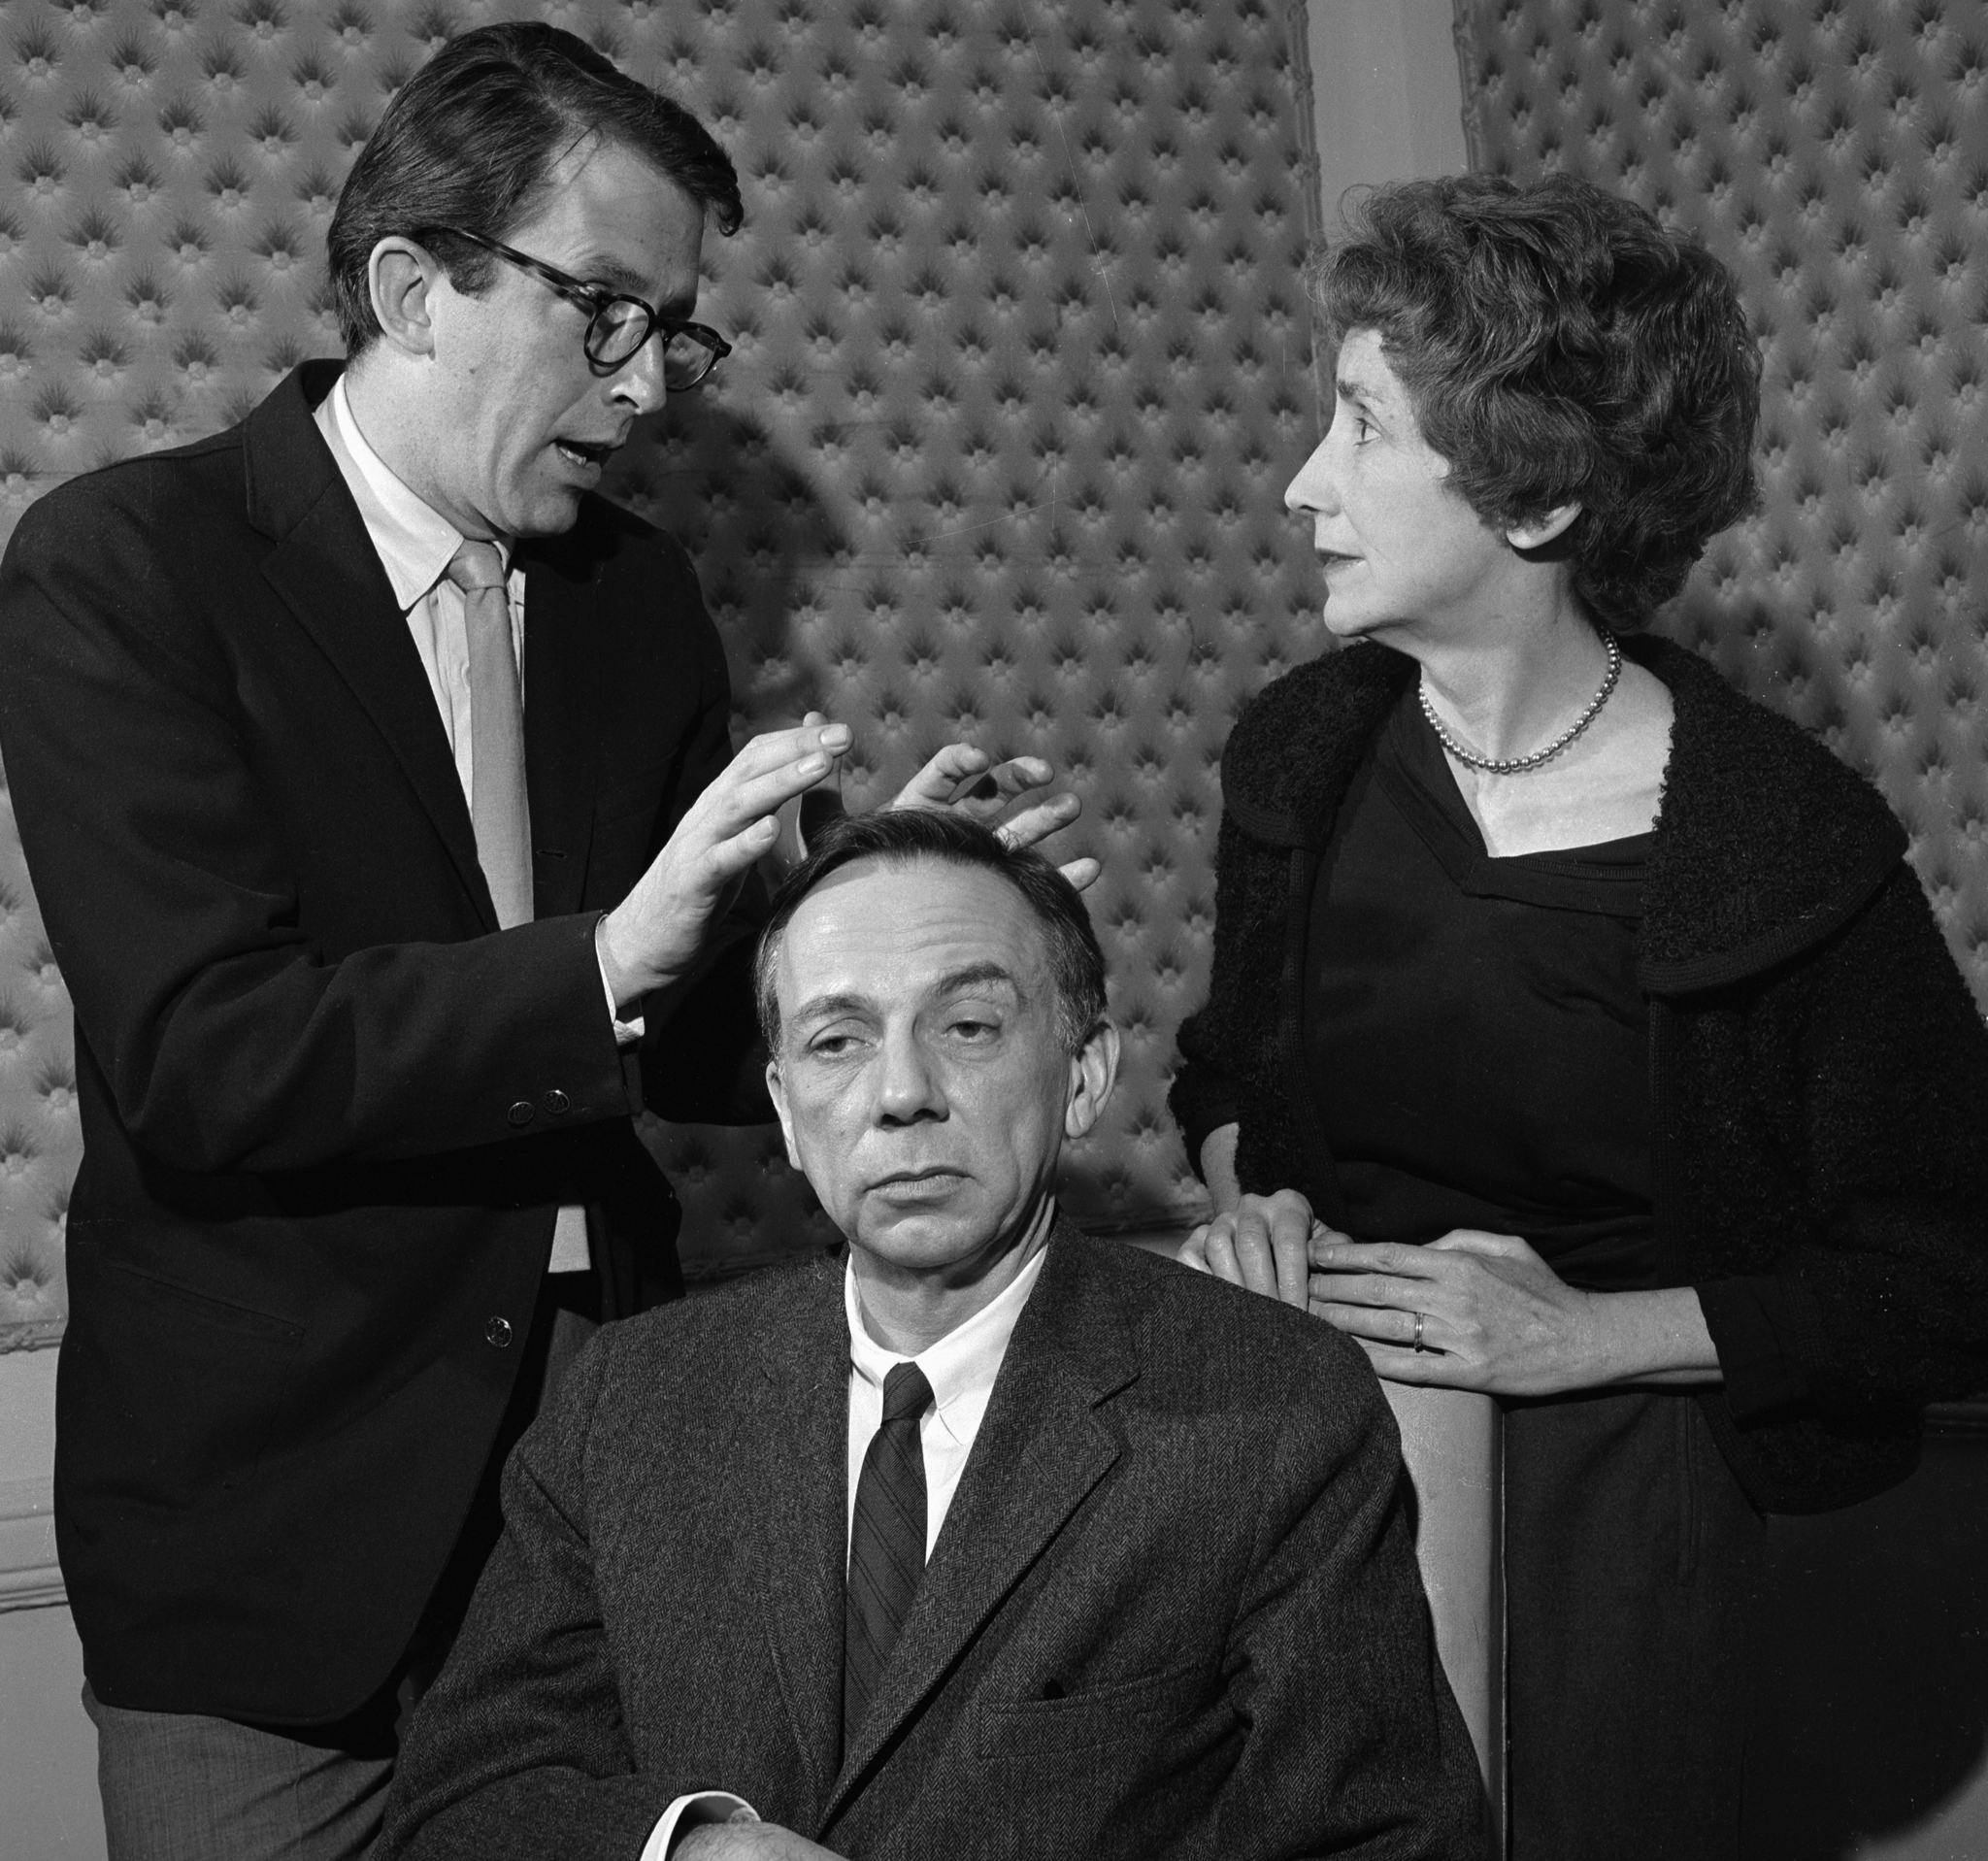 Mildred Dunnock, Henry Jones, and Fritz Weaver in 'Way Out (1961)